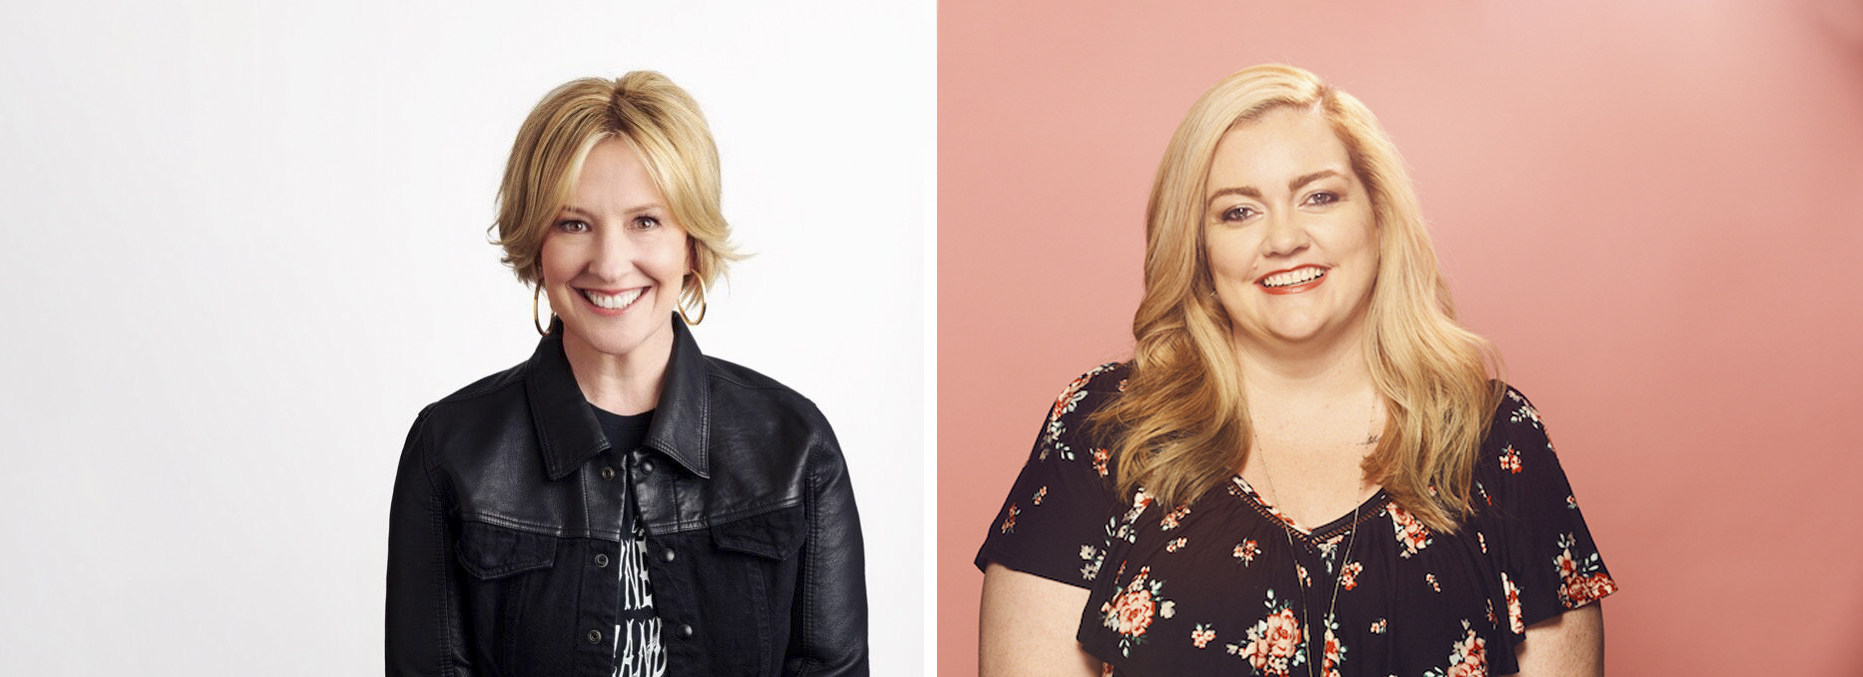 Colleen Hoover (above, right) dominated publishing in 2022 in the way Stieg Larsson and Stephenie Meyer once did. Brené Brown (above, left), the queen of self-help guides, ran her close. Photo: Colleen Hoover and Brené  Brown